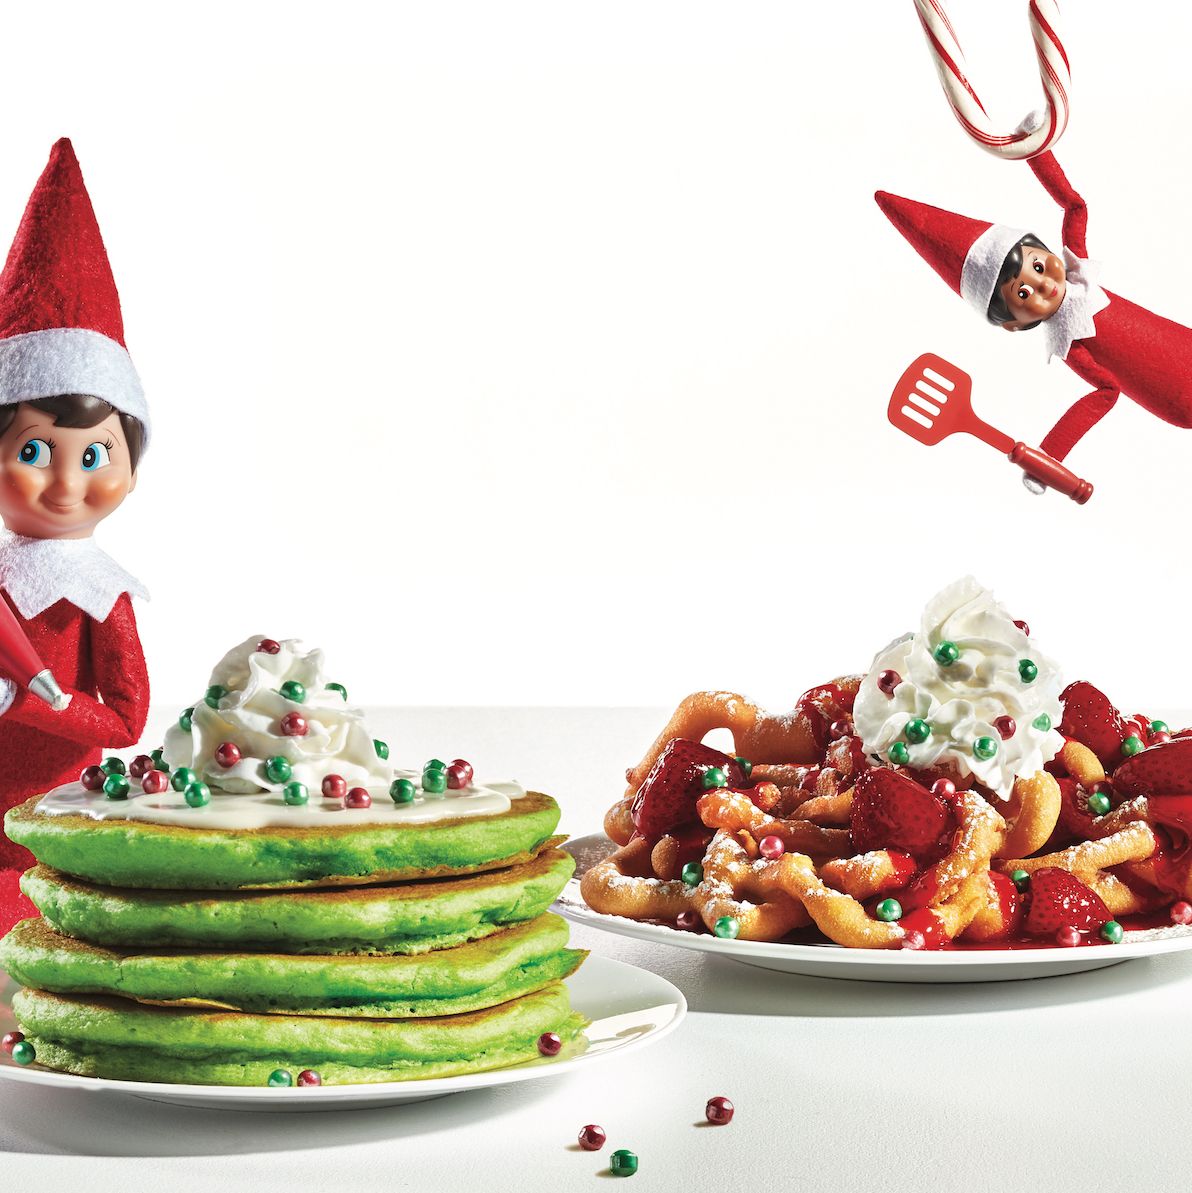 IHOP Created A Holiday Menu Inspired By The Grinch - IHOP's Green